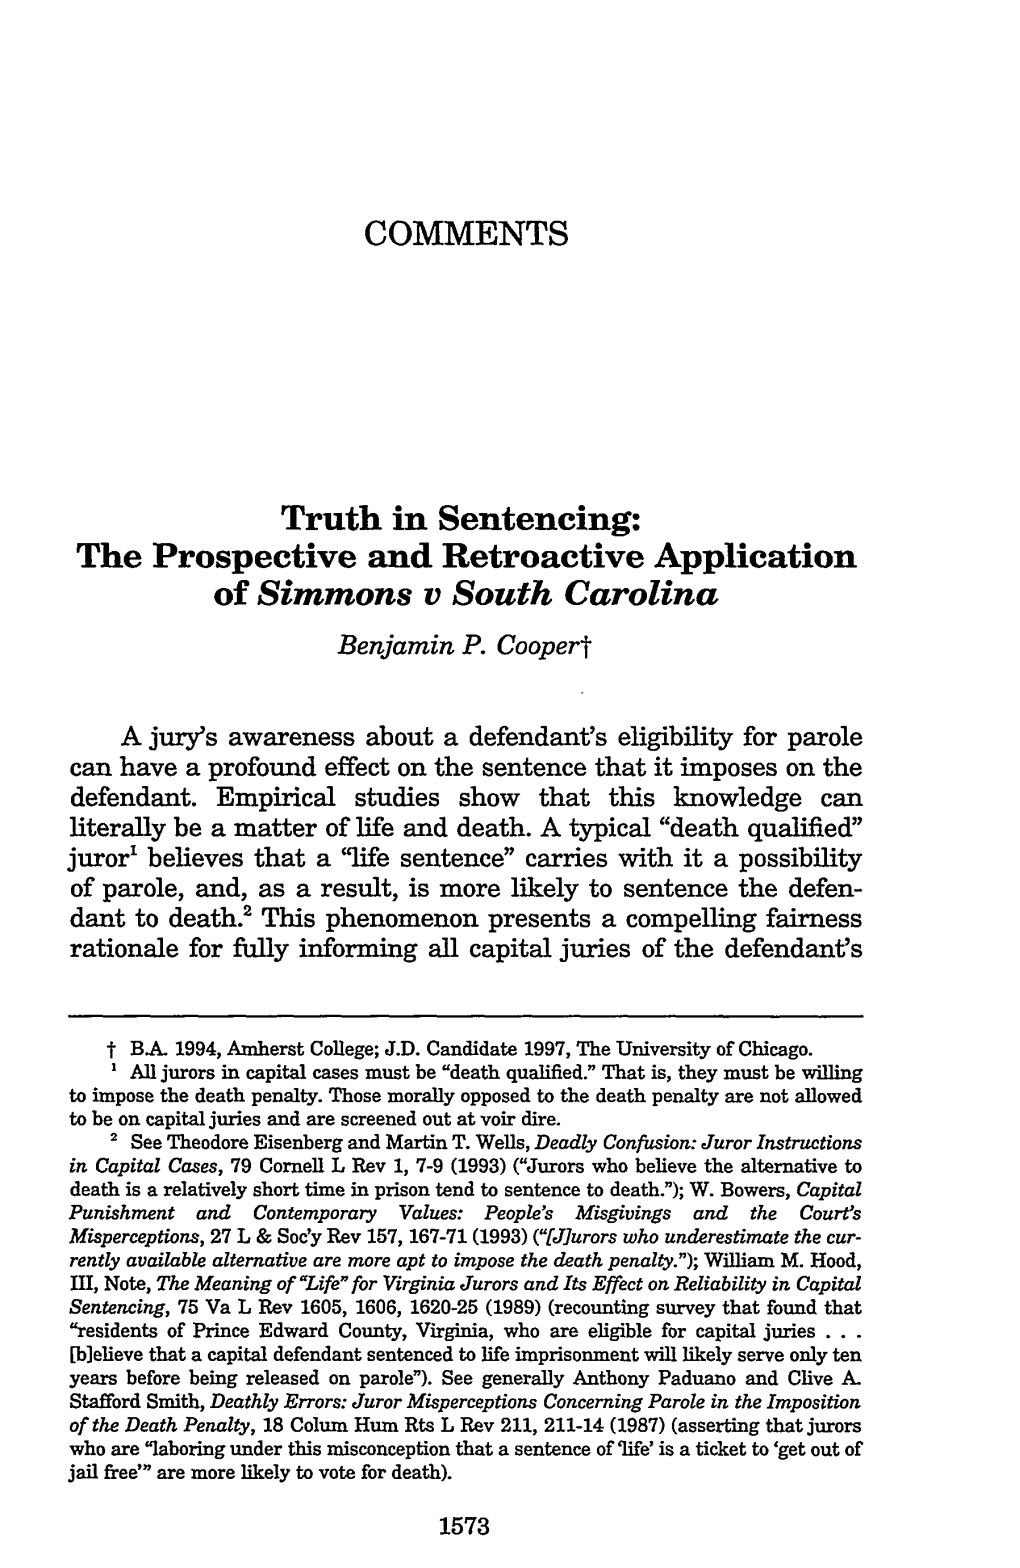 Truth in Sentencing: the Prospective and Retroactive Application of Simmons V South Carolina Benjamin P